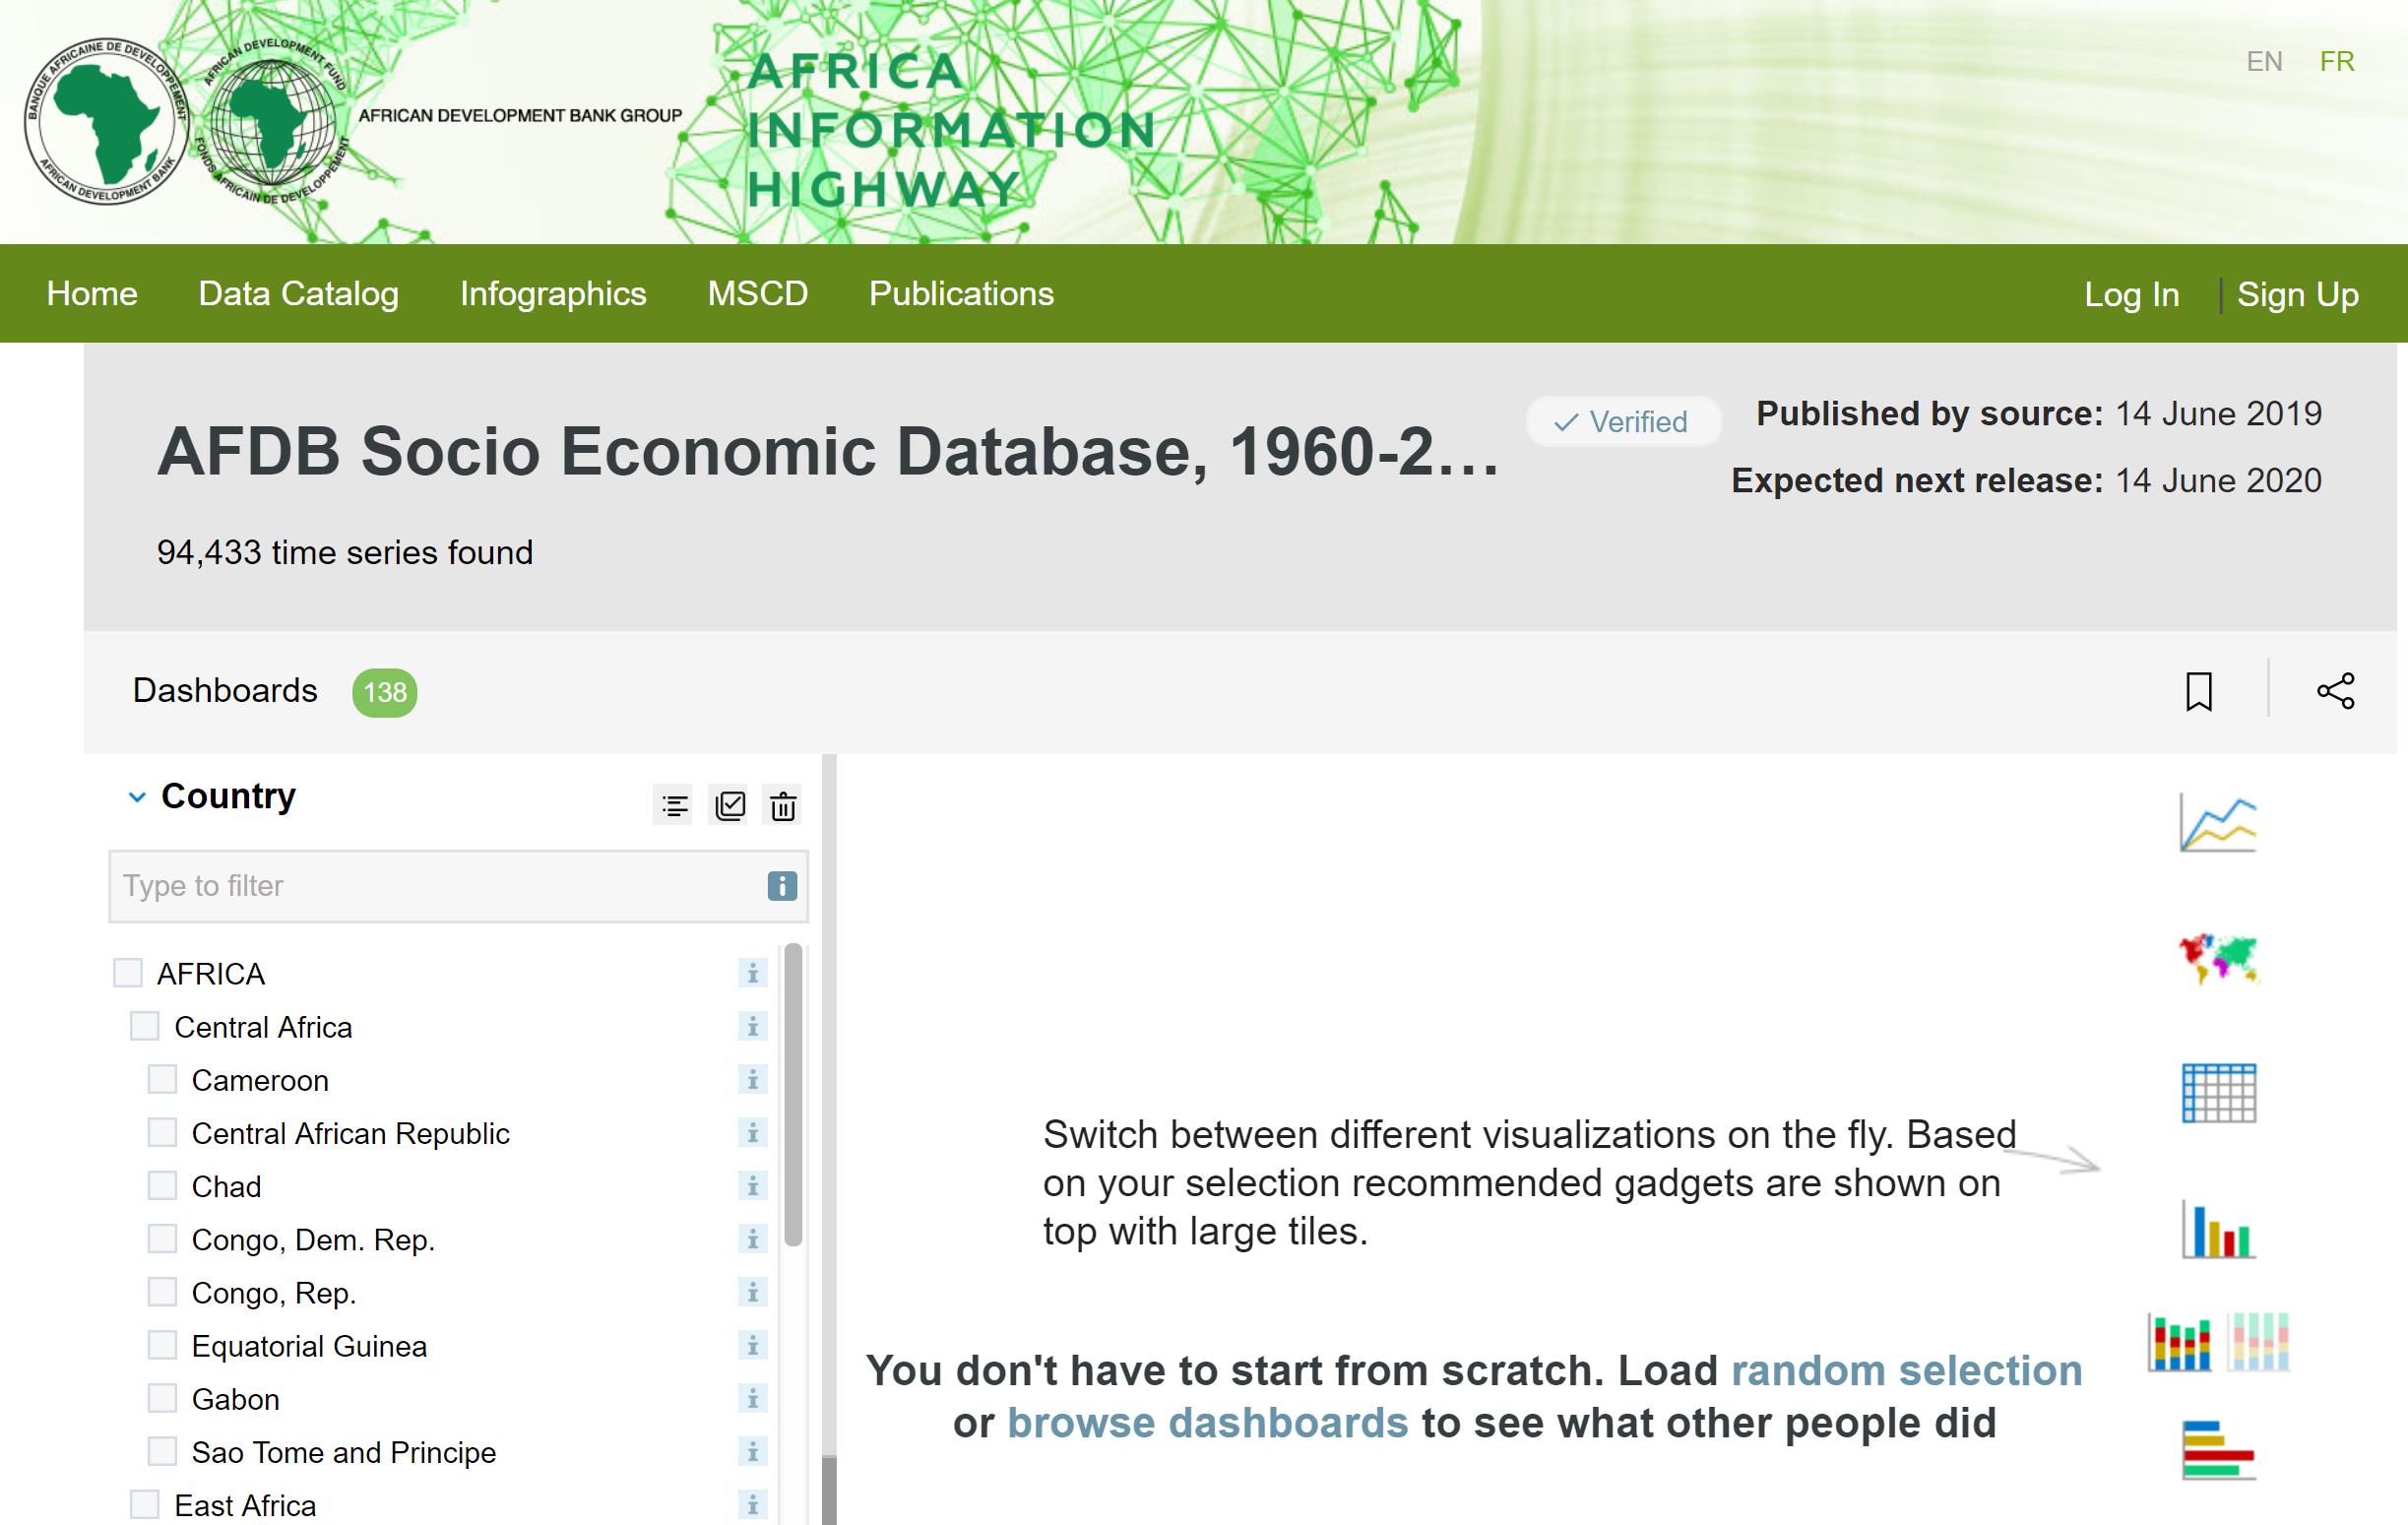 Screenshot of the AFDB Socio Economic Database main page. On the left, there are three filters, Country, Indicator, and Time, from top to bottom by order.